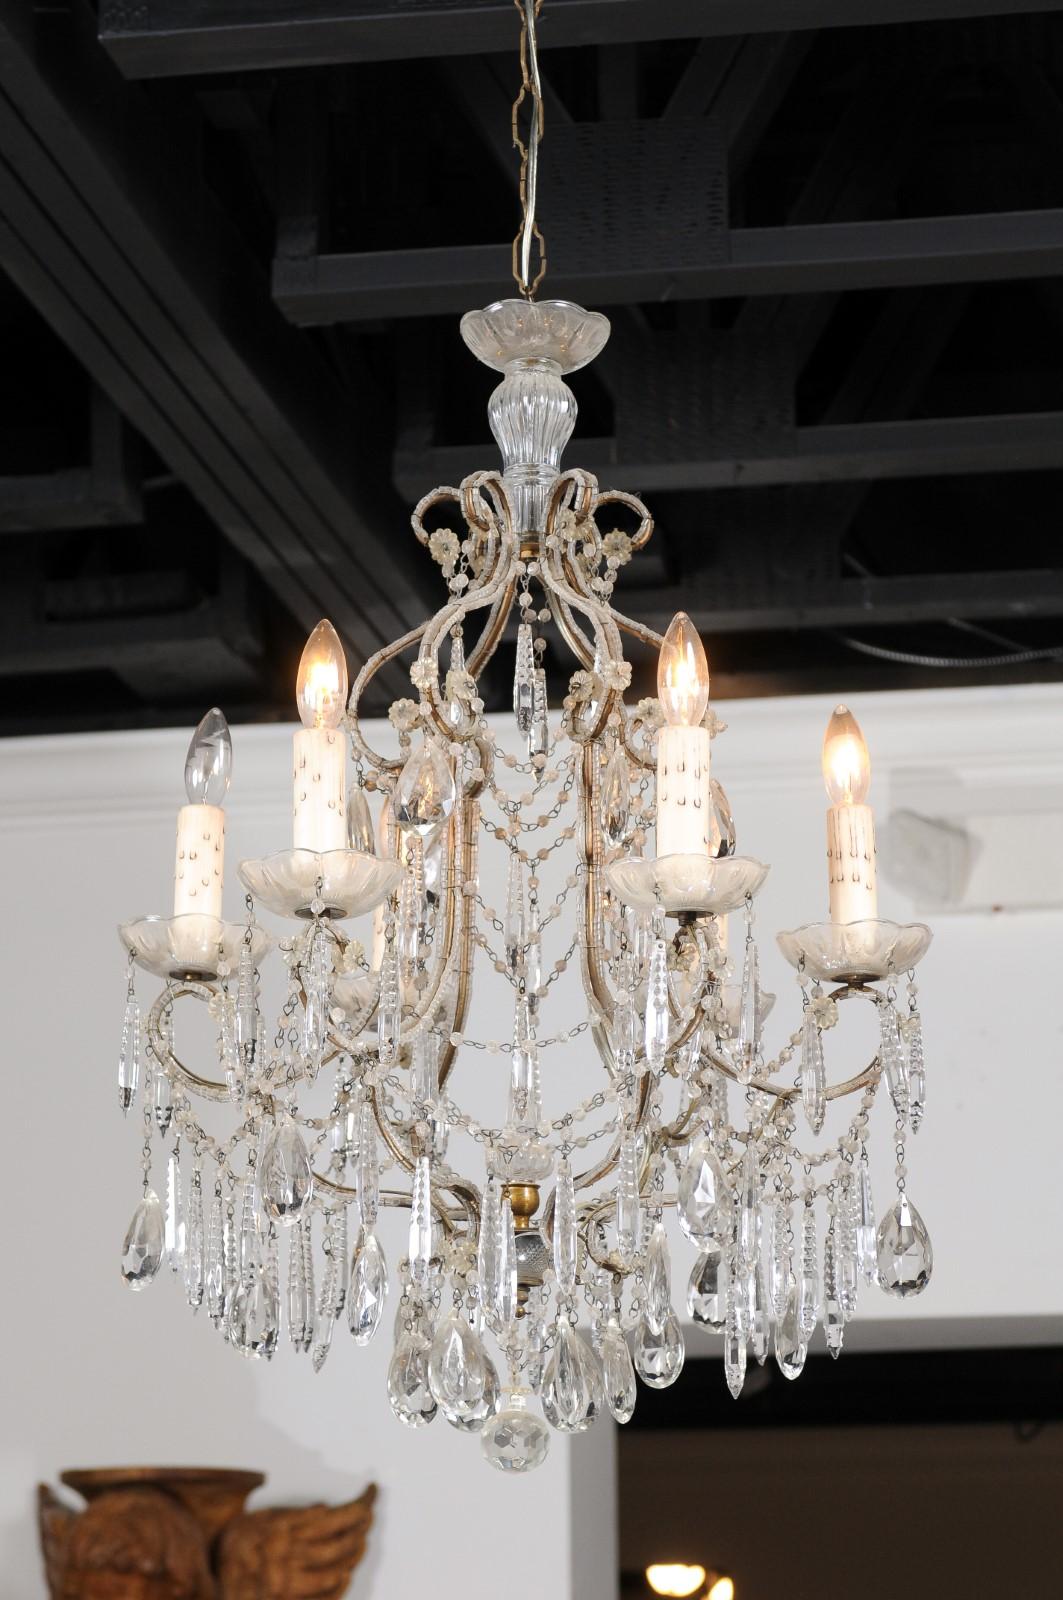 Italian 19th Century Six-Light Chandelier with Beaded Arms and Spear Crystals For Sale 13